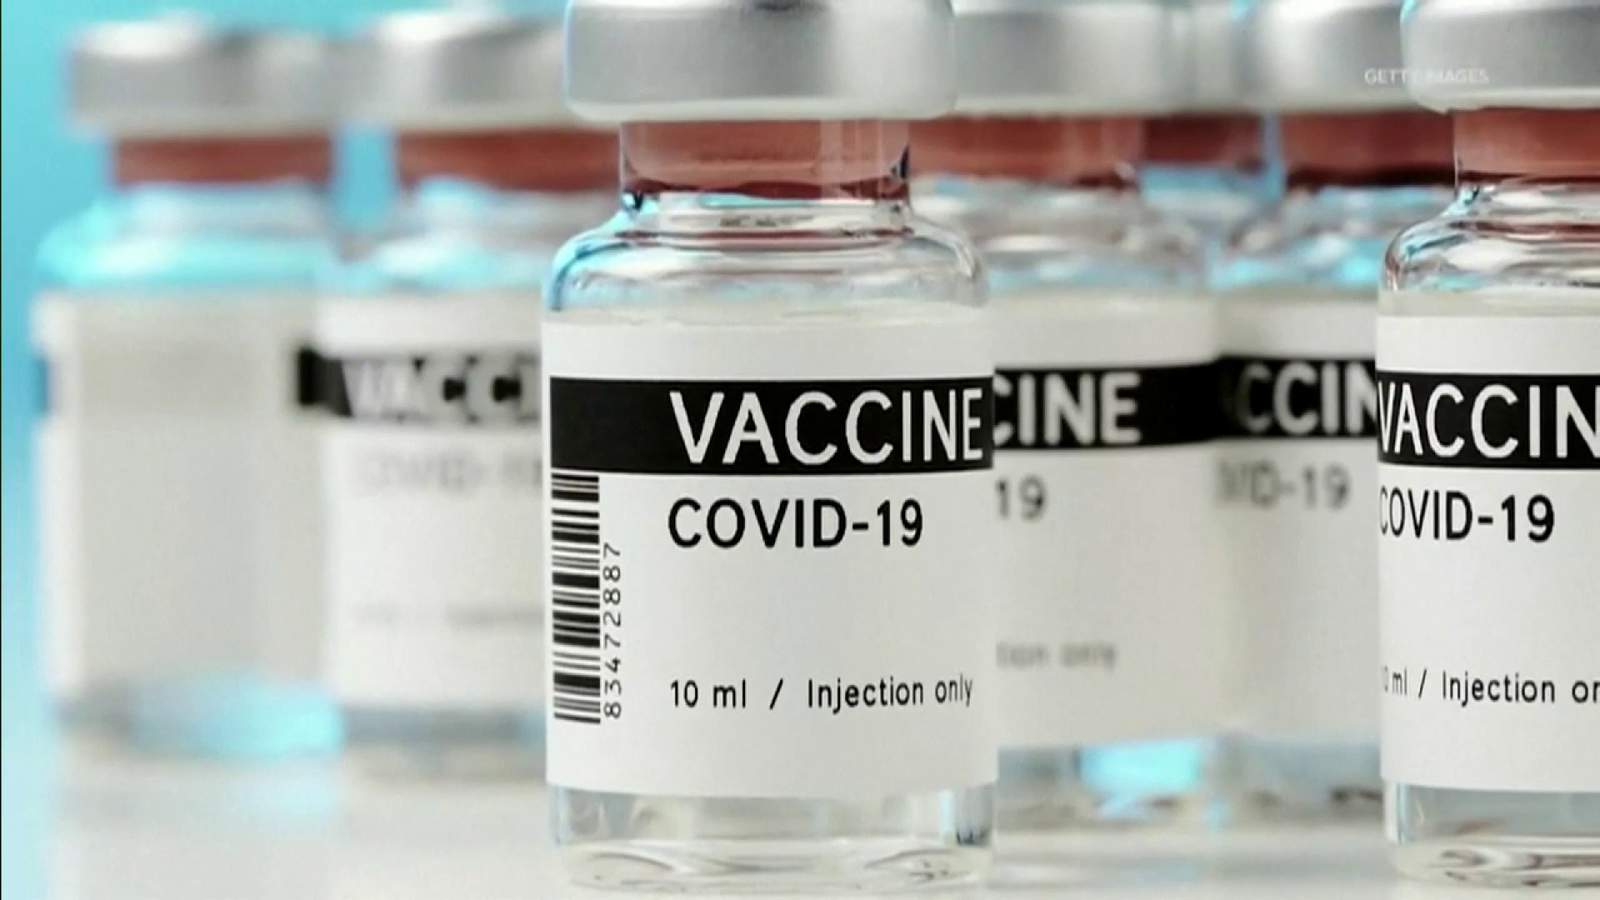 Moderna vaccines delayed by snowstorm may not arrive until next week, Florida governor says